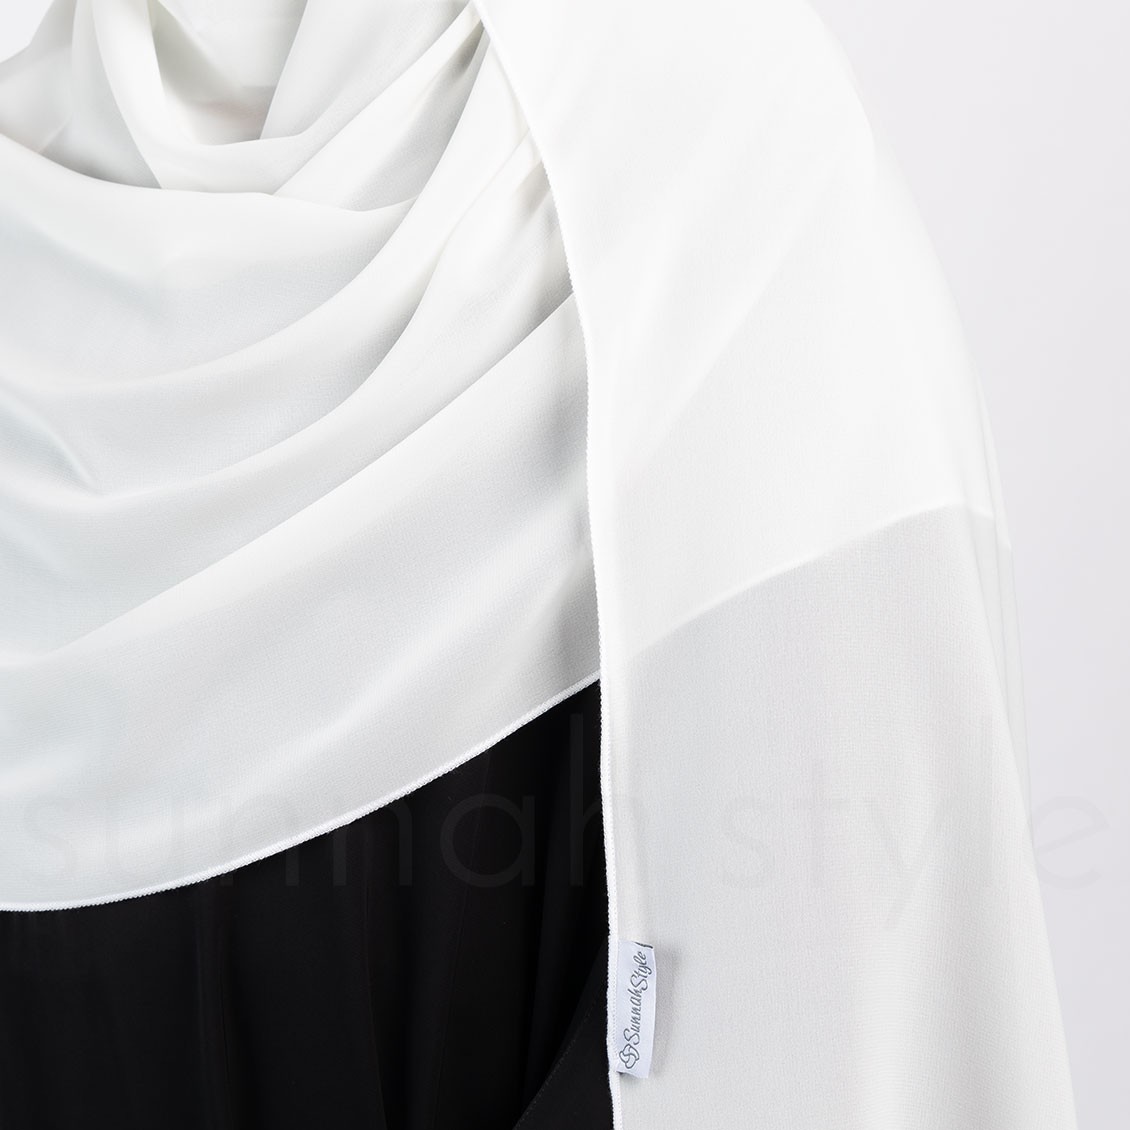 Sunnah Style Essentials Shayla - Large White